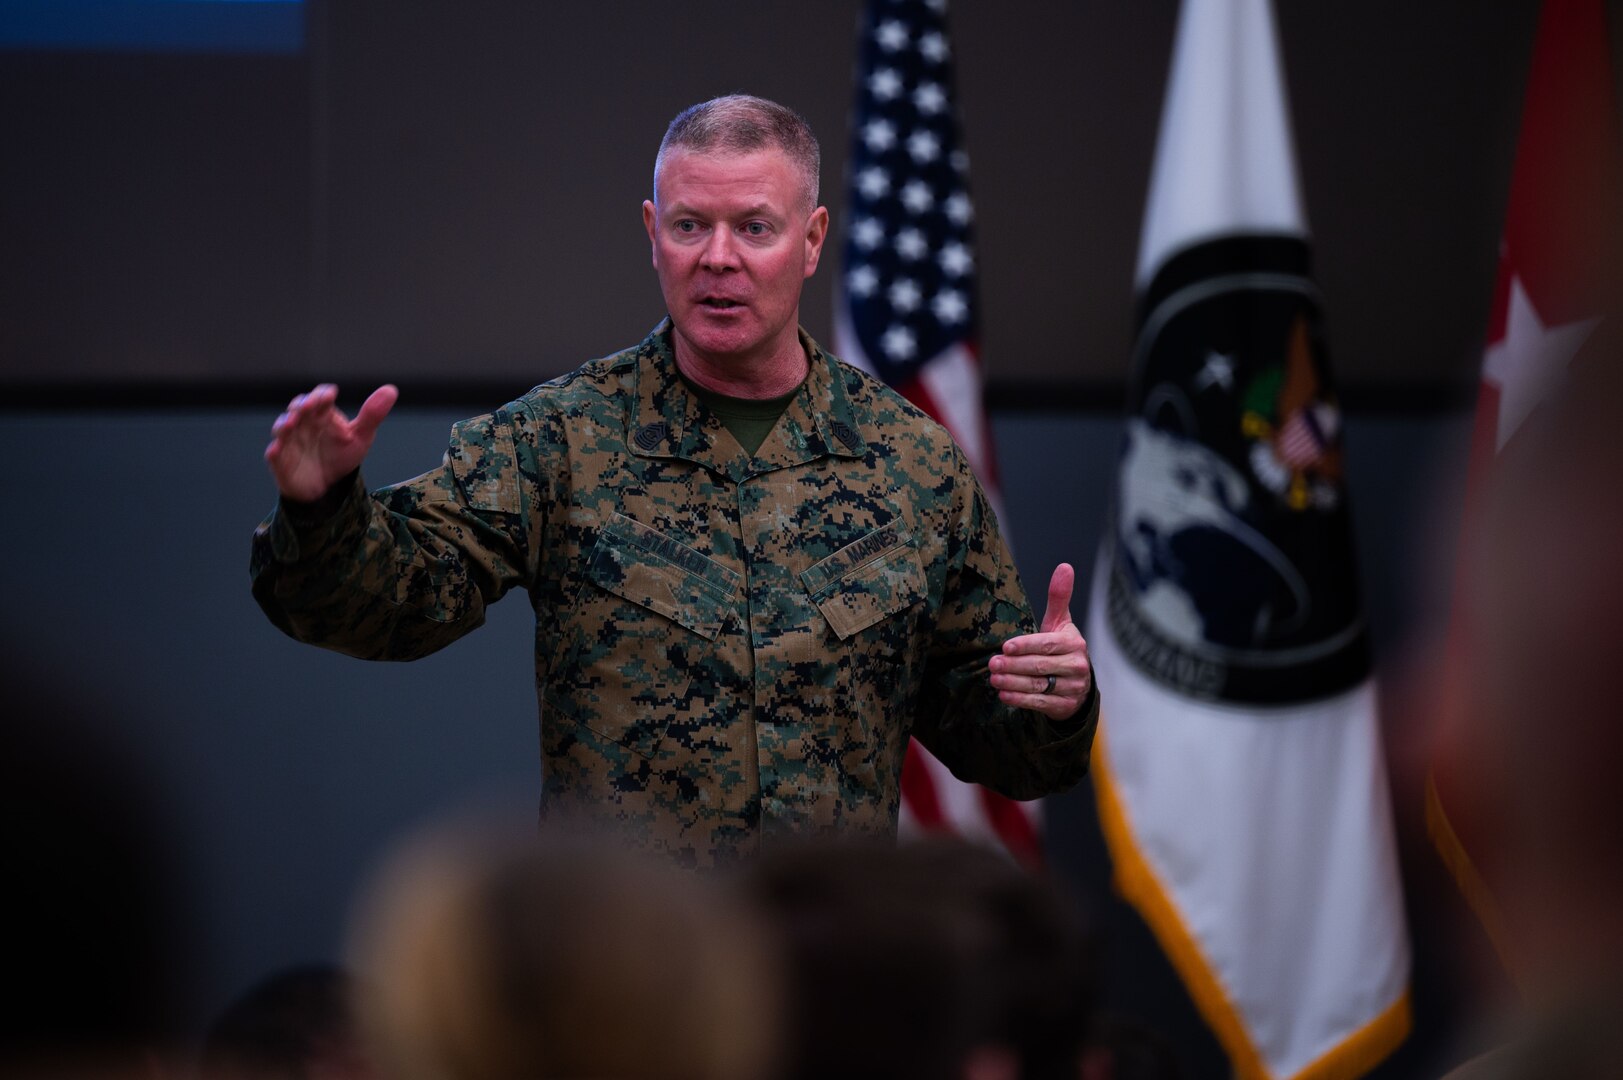 U.S. Marine Corps Master Gunnery Sgt. Scott Stalker, United States Space Command command senior enlisted leader, speaks to members of the 533rd Training Squadron at the Space Delta 1 auditorium on Vandenberg Space Force Base, Calif., Jan. 5, 2023. The 533 TRS provides the technical training for space operators going into the U.S. Space Force and is a pipeline into three Space Force Warfighter areas of expertise – Orbital Warfare, Space Battle Management and Electronic Warfare. USSPACECOM conducts operations in, from, and to space to deter conflict, and if necessary, defeat aggression, deliver space combat power for the Joint and Combined force, and defend U.S. vital interests with allies and partners. (U.S. Space Force photo by Tech. Sgt. Luke Kitterman)